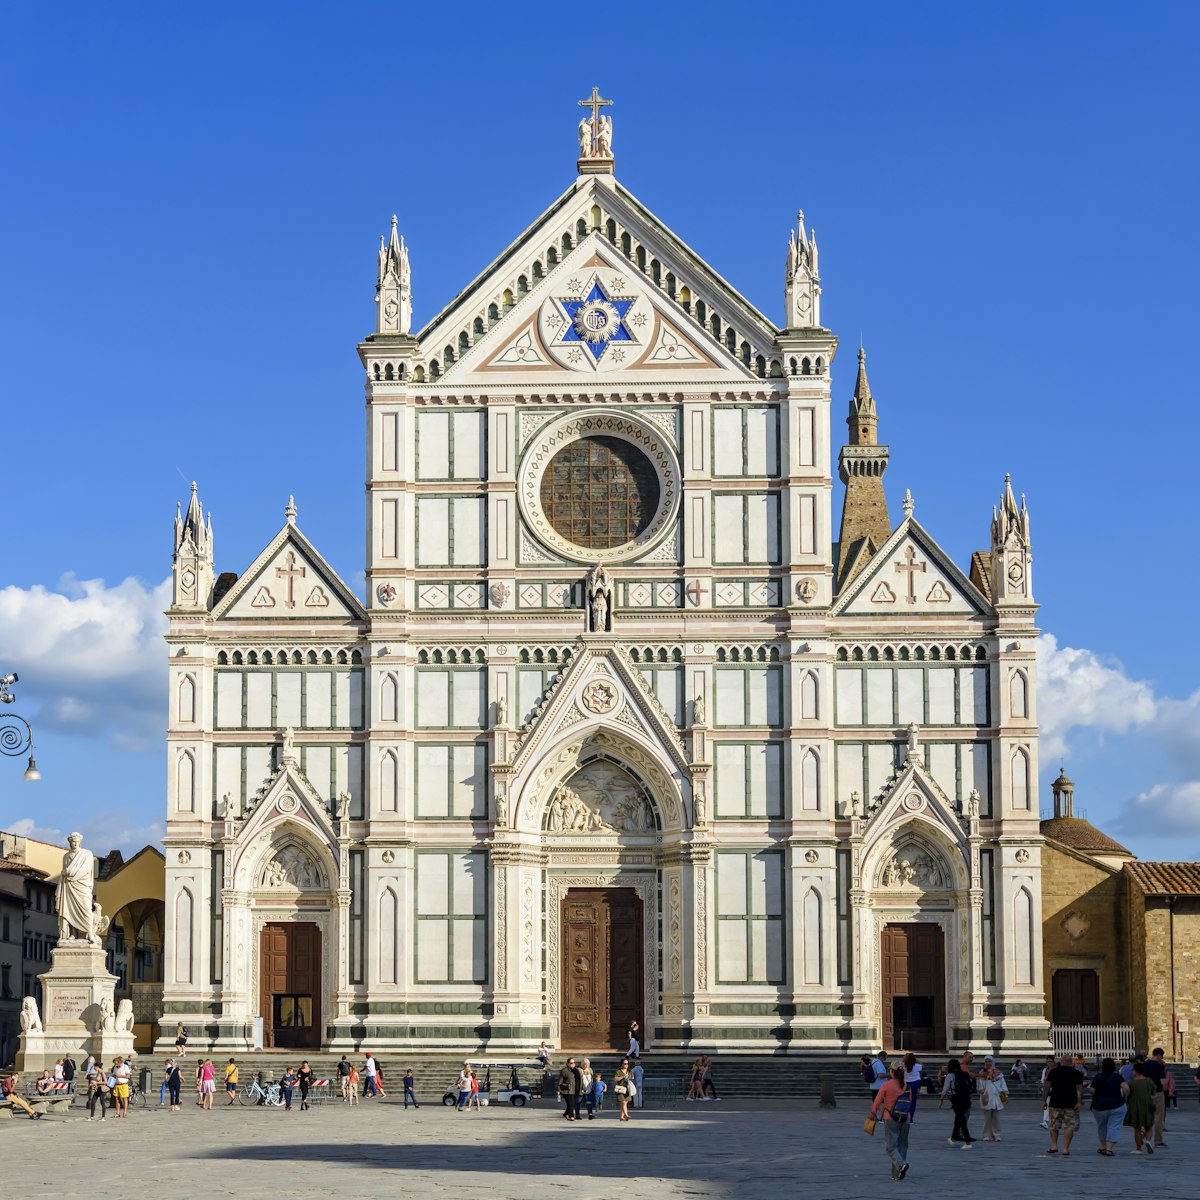 Basilica of the Holy Cross (Santa Croce) in Florence, Italy